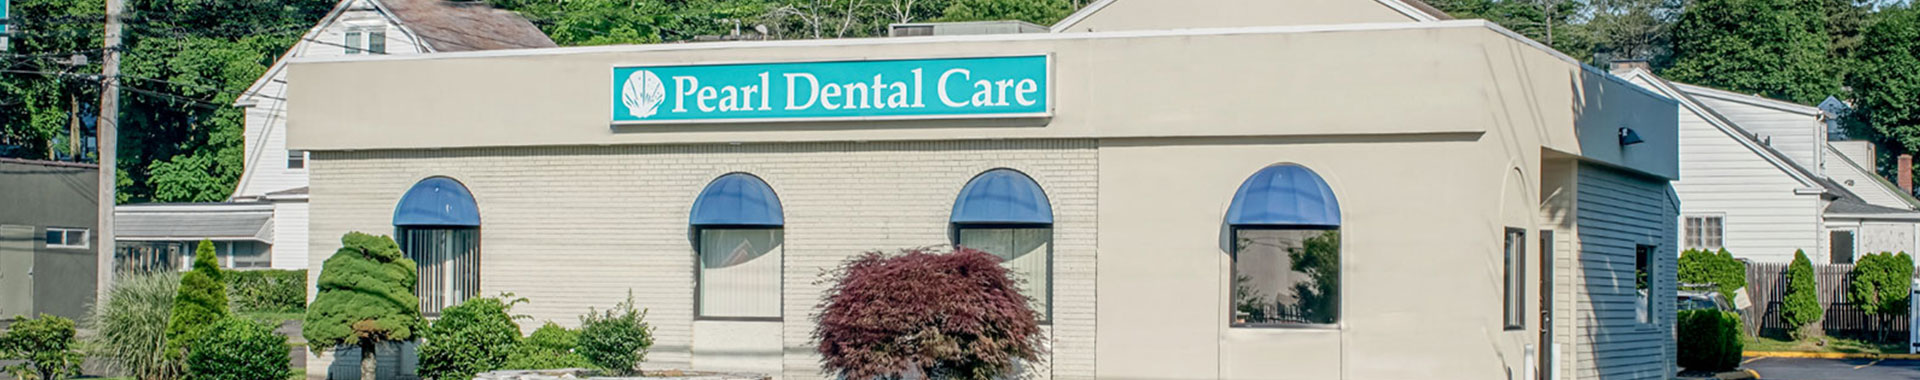 Pearl Dental Care - front view